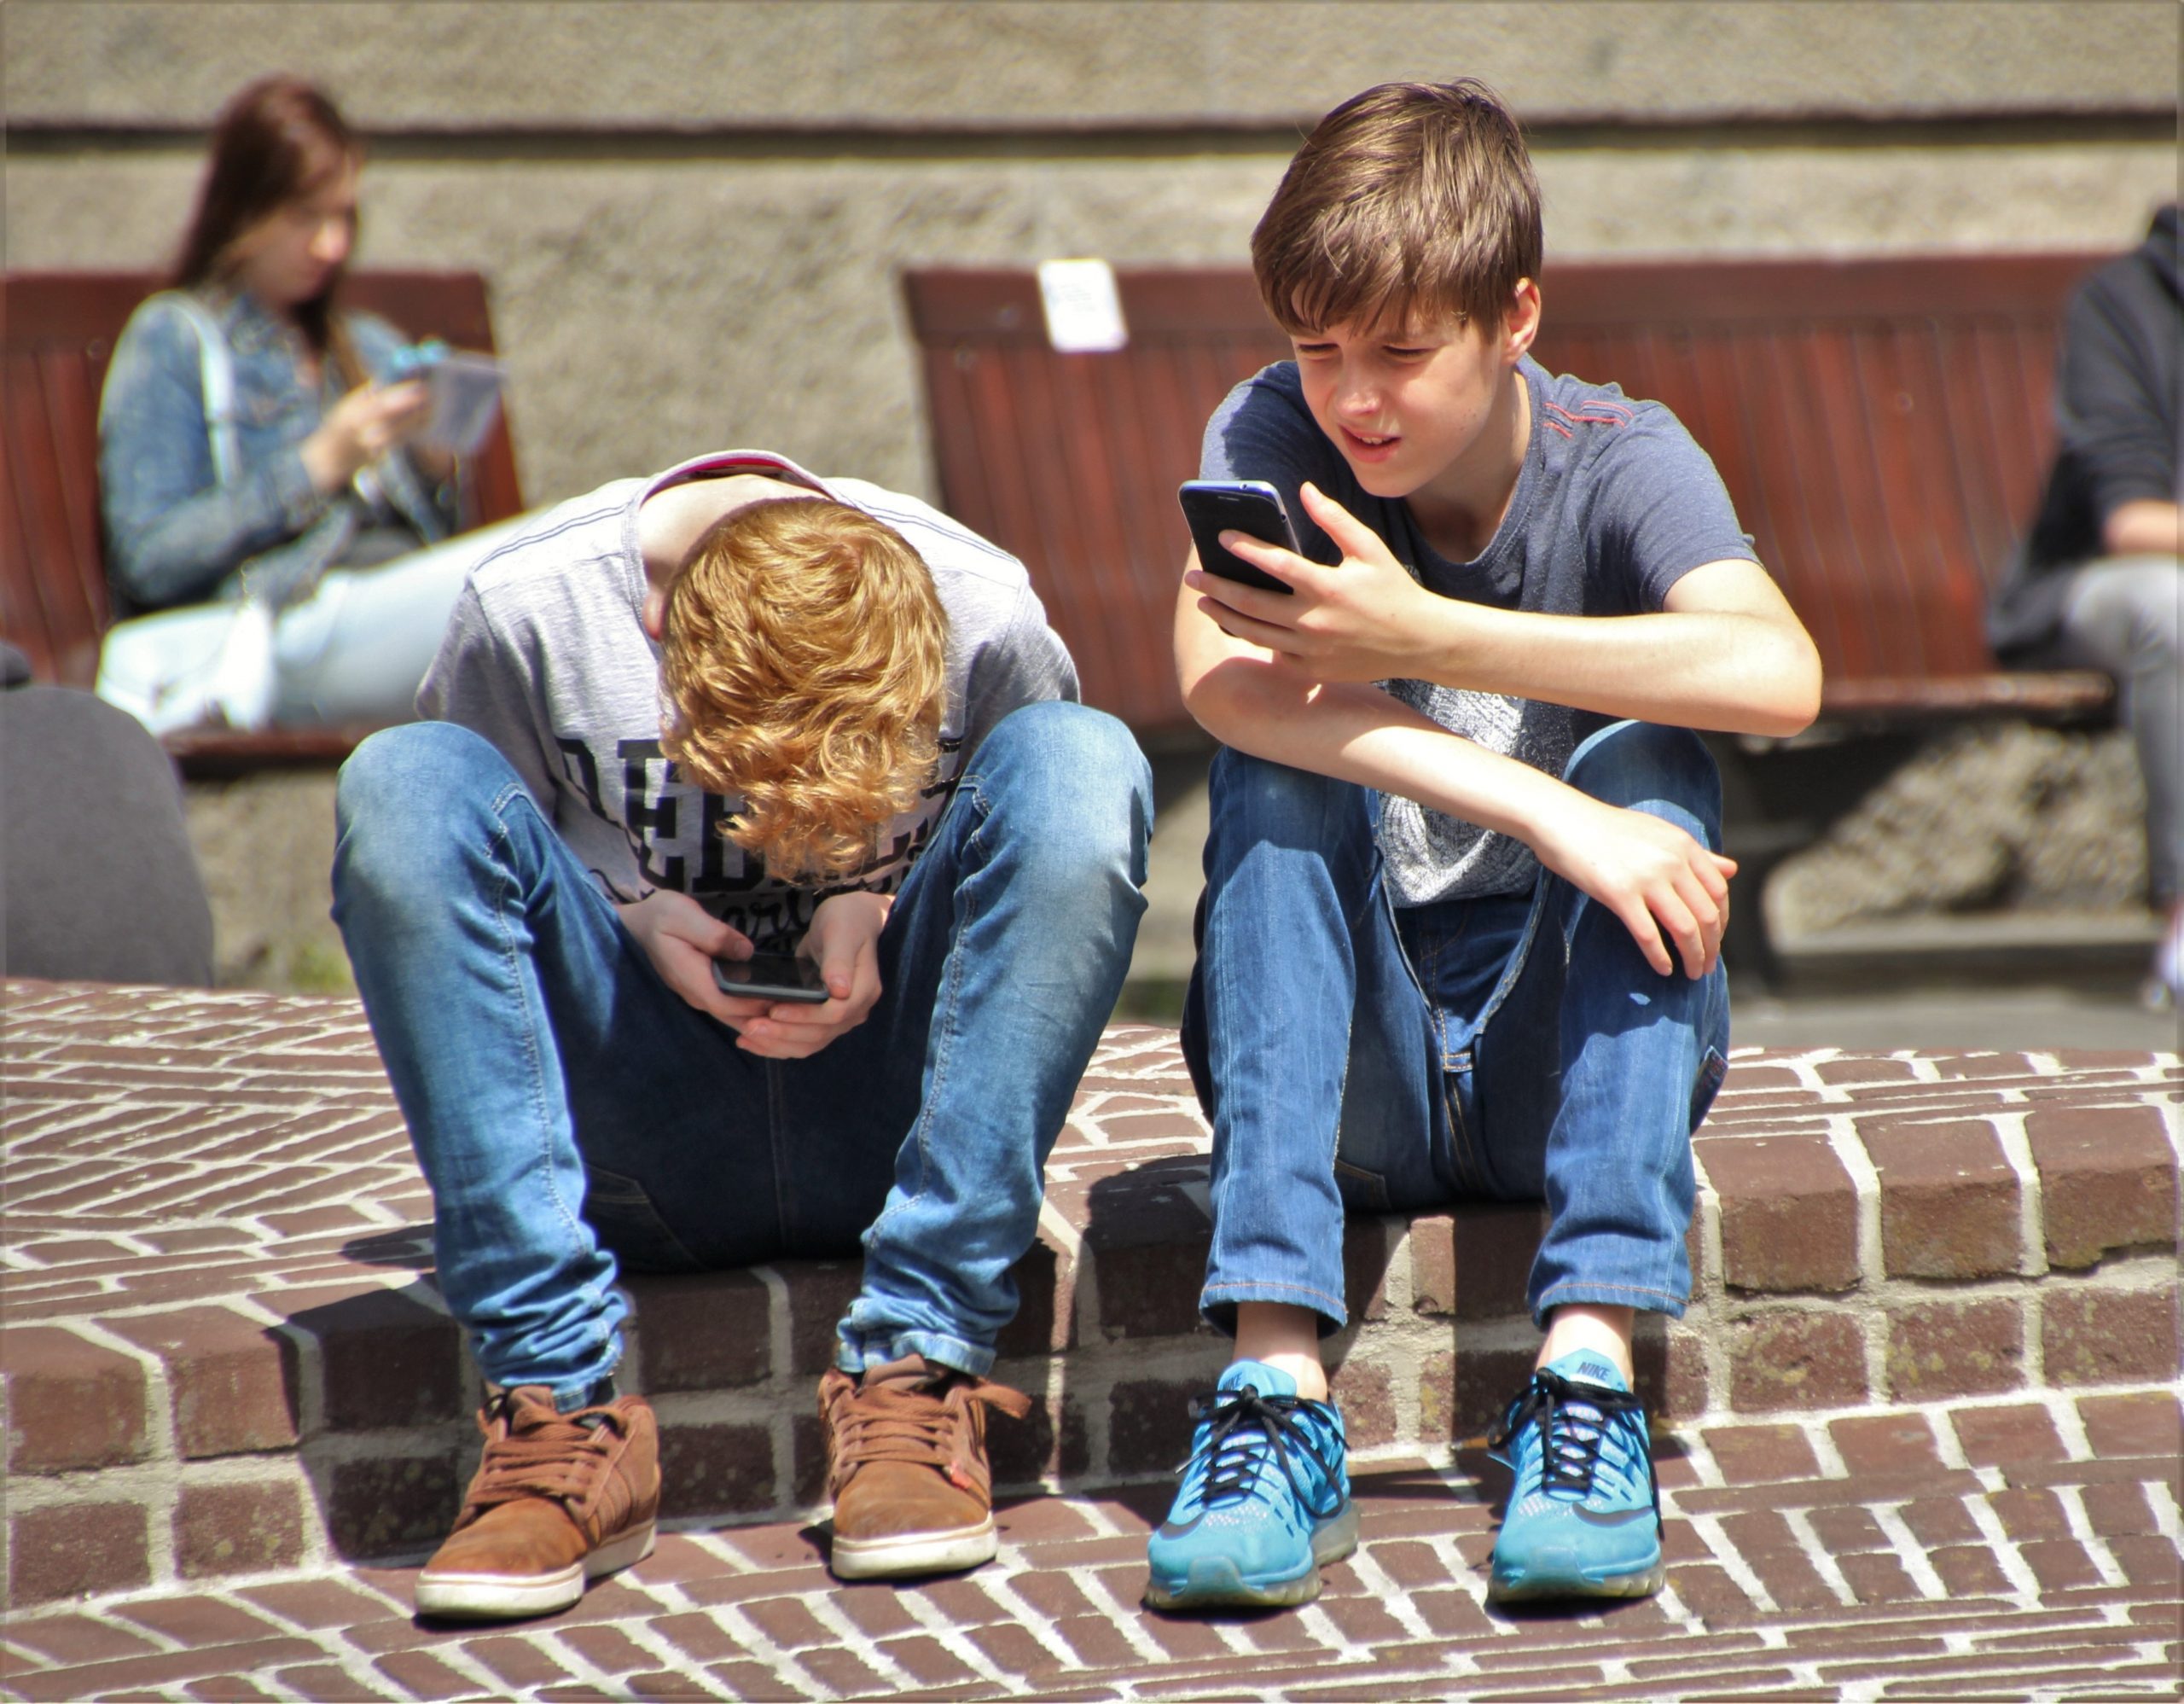 Two boys sitting outside with mobile phones